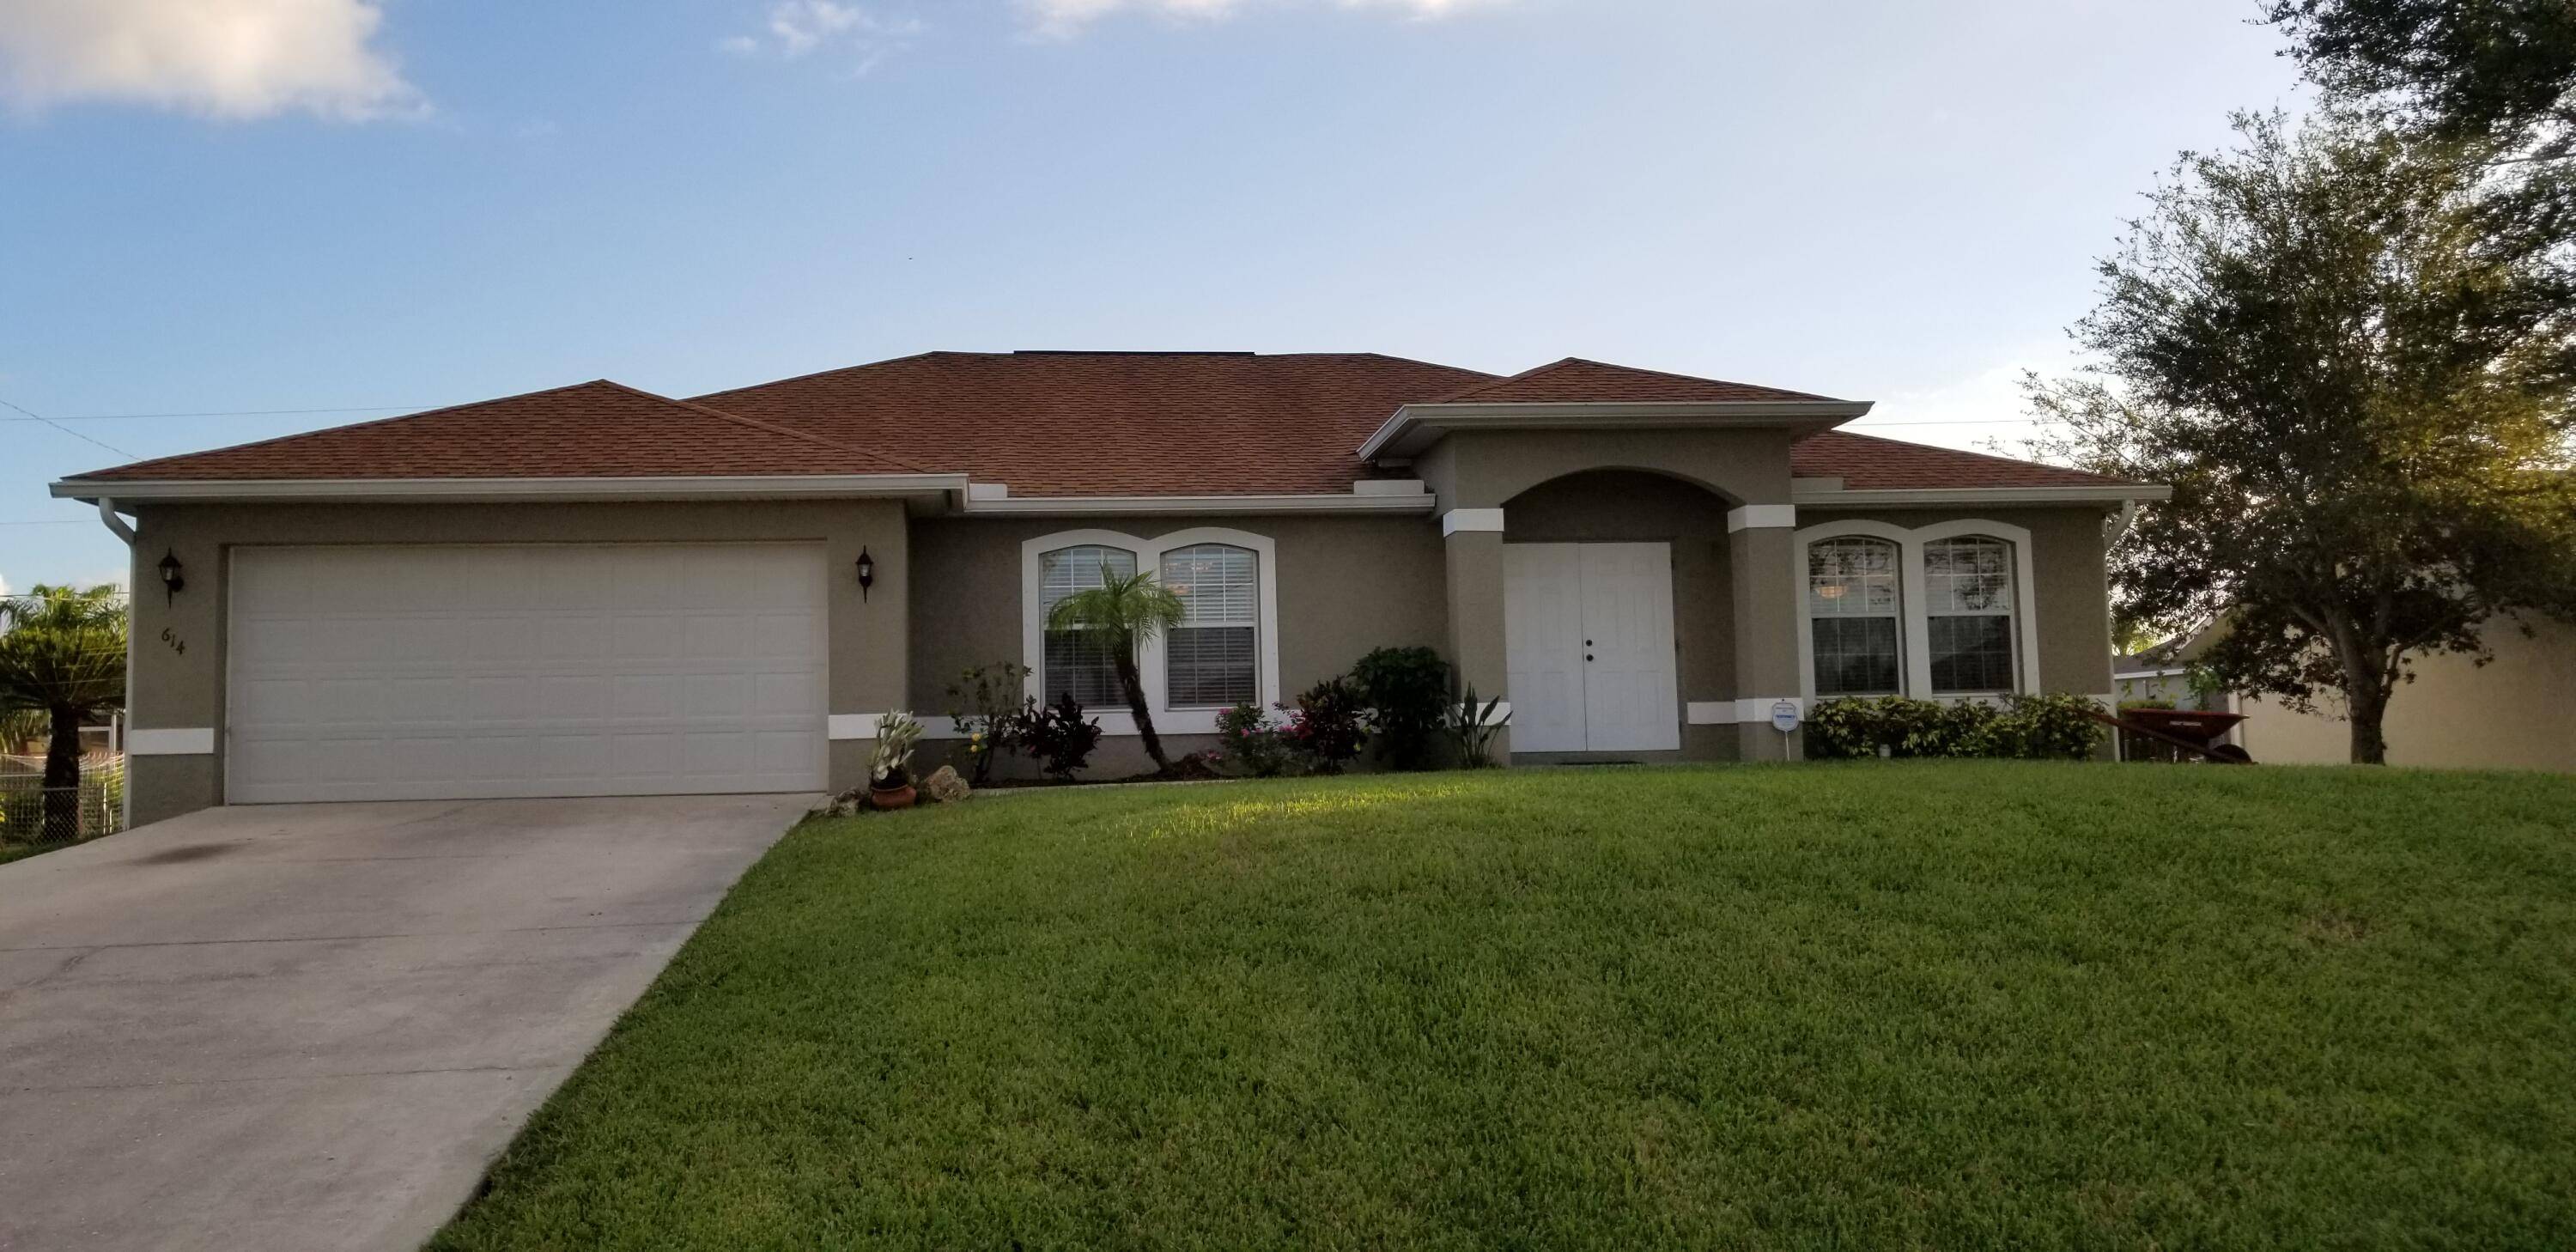 ! ! LOCATION, LOCATION, THIS BEAUTIFUL AND WELL KEPT ready to move in home located in a convenient and desirable SW Cape Coral location !